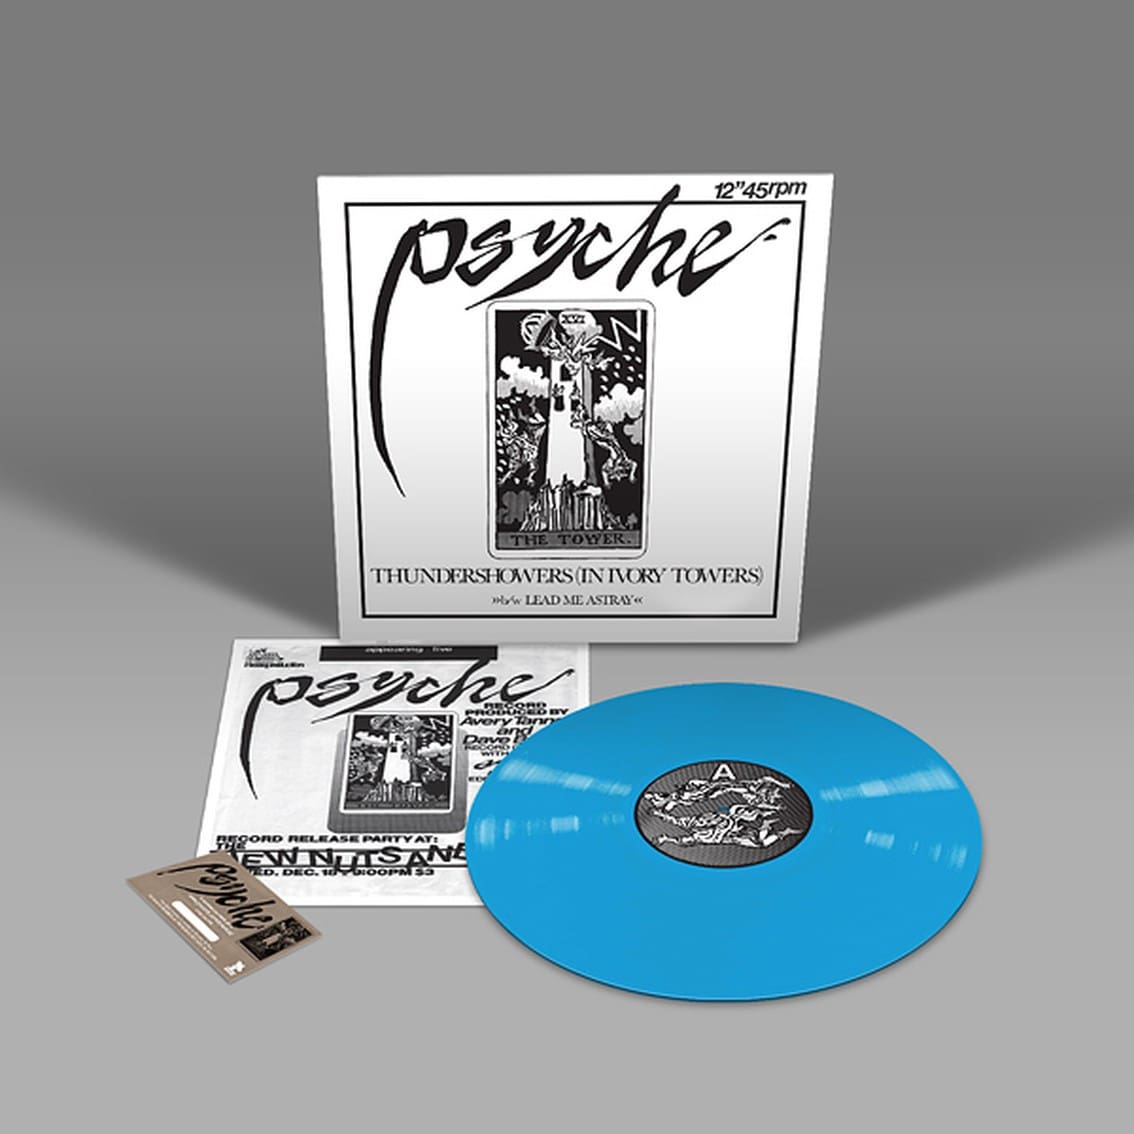 Psyche gets 30th anniversary reissue of first 12 inch release 'Thundershowers (In Ivory Towers)' - 2 versions available